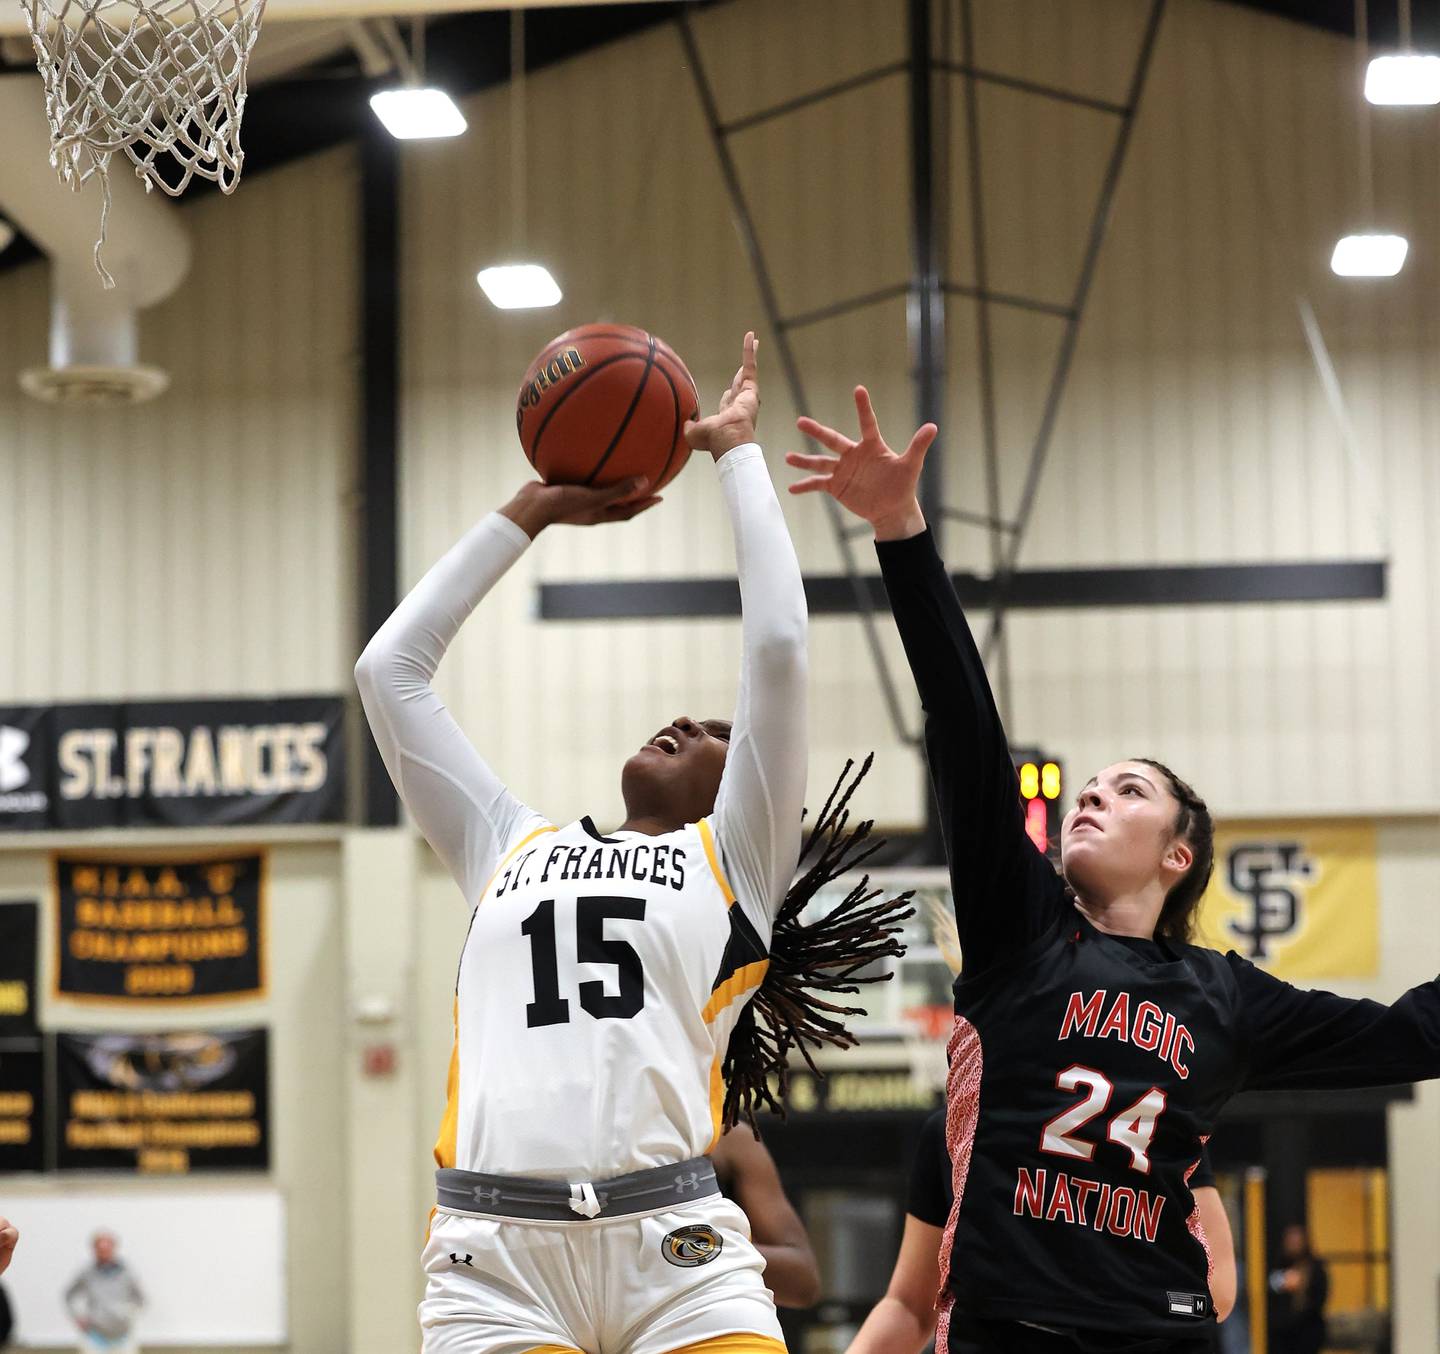 St. Frances' Ande'a Cherisier (15) puts up a shot as Mercy's Logan Jefferson defends during Wednedsay evening's IAAM A Conference girls basketball contest. Cherisier finished with 15 points as the No. 3 Panthers defeated eighth-ranked Mercy, 69-32, in their home opener in East Baltimore.